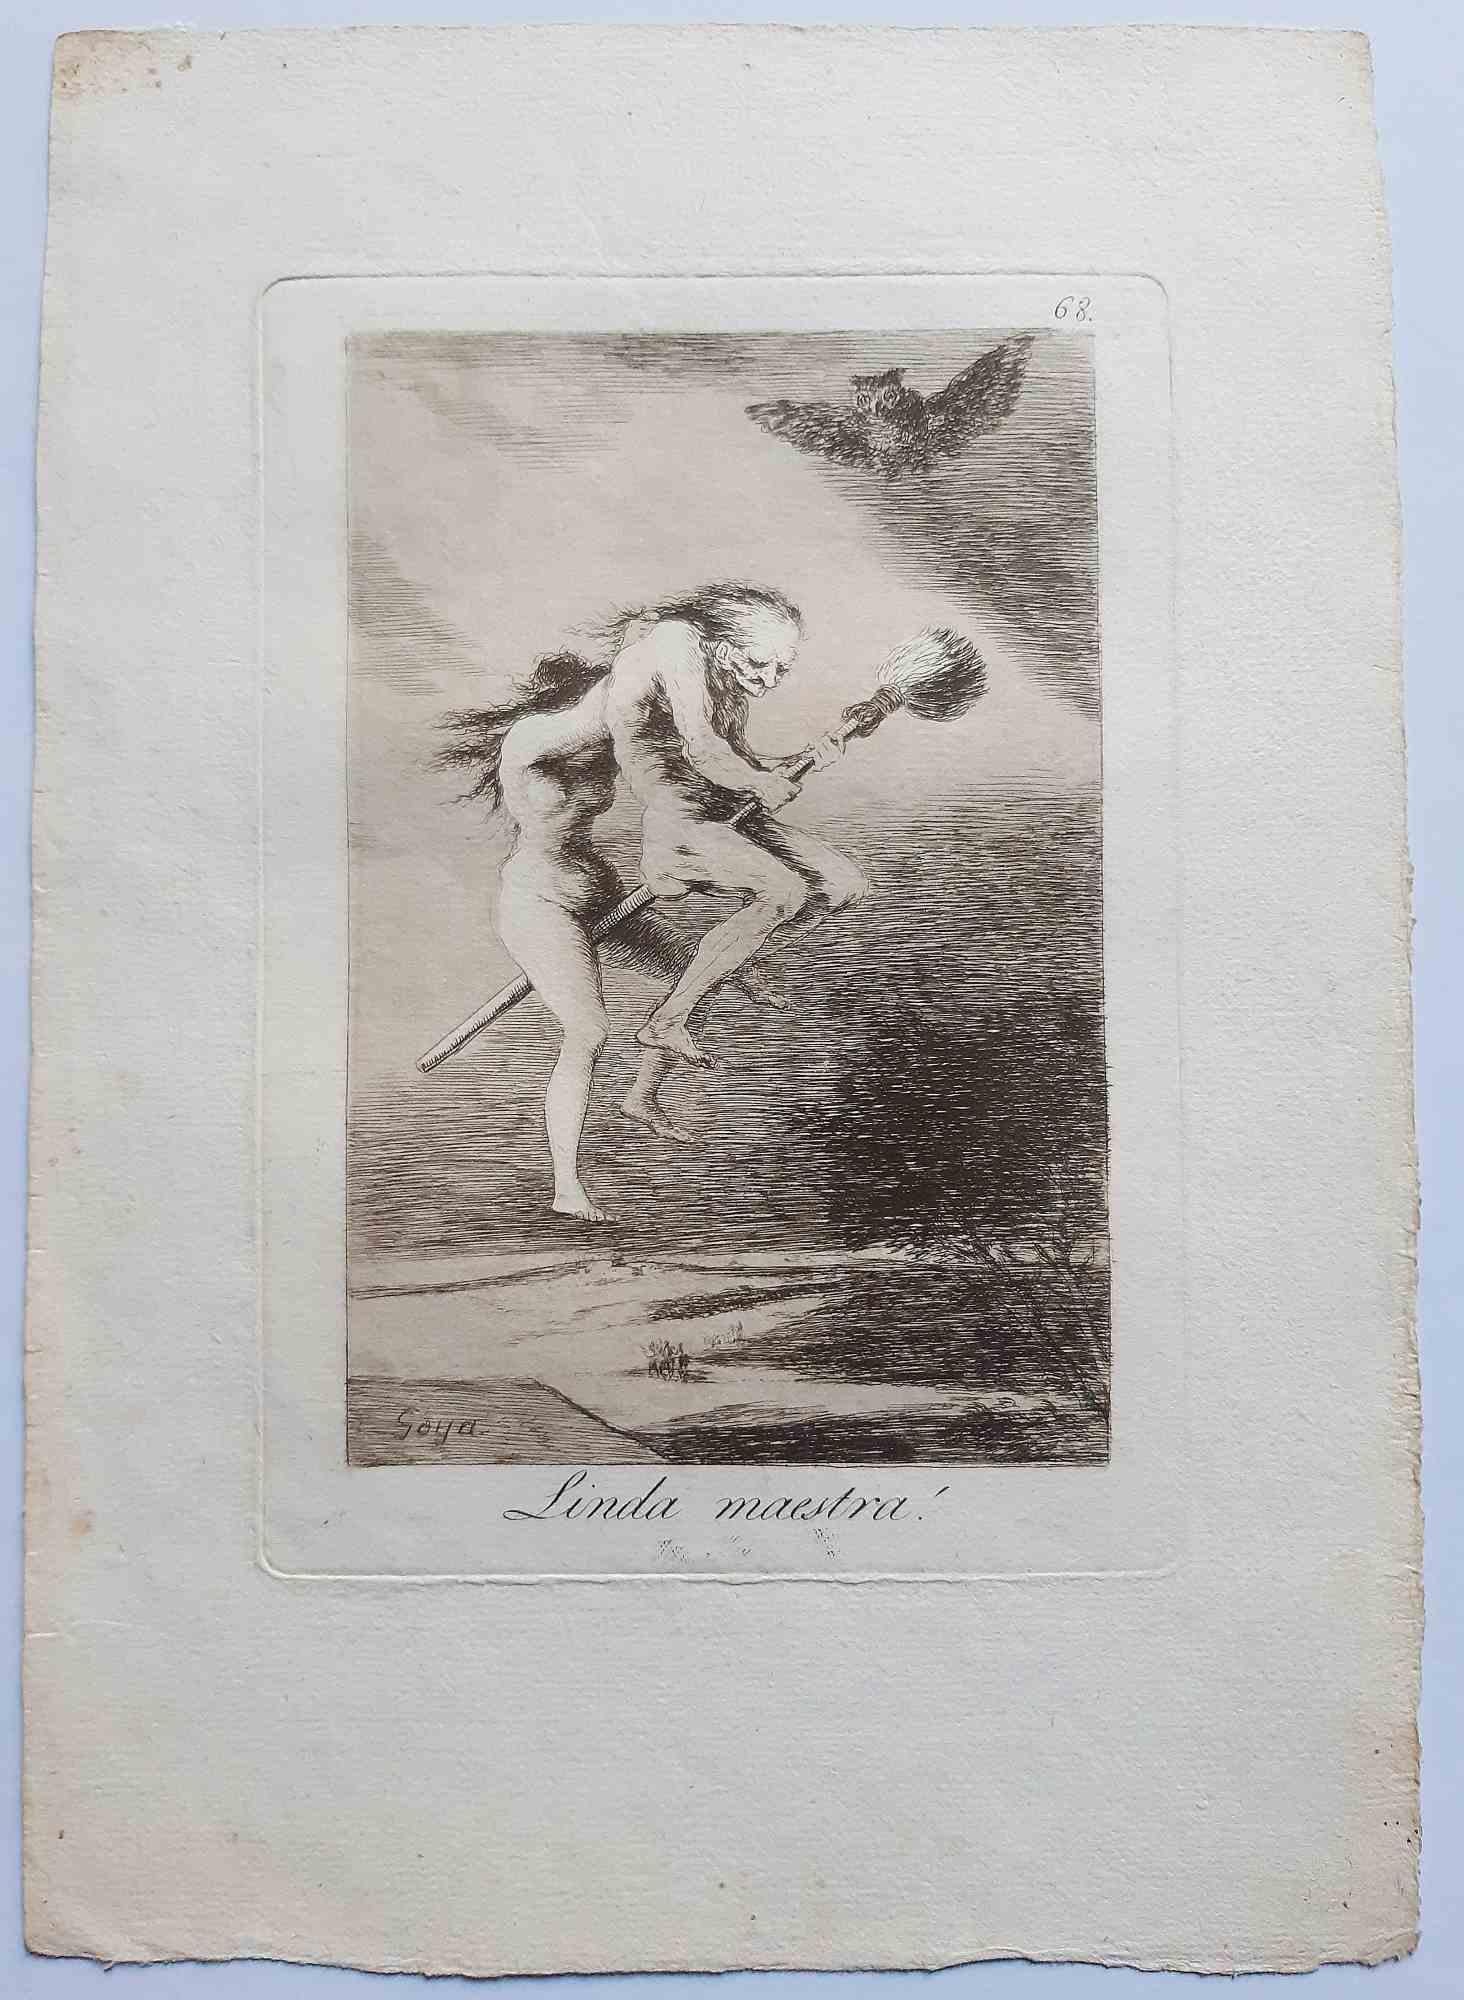 Linda maestra from Los Caprichos  is an original artwork realized by the artist Francisco Goya and published for the first time in 1799.

Etching and aquatint on paper.

The etching is part of the First Edition of 